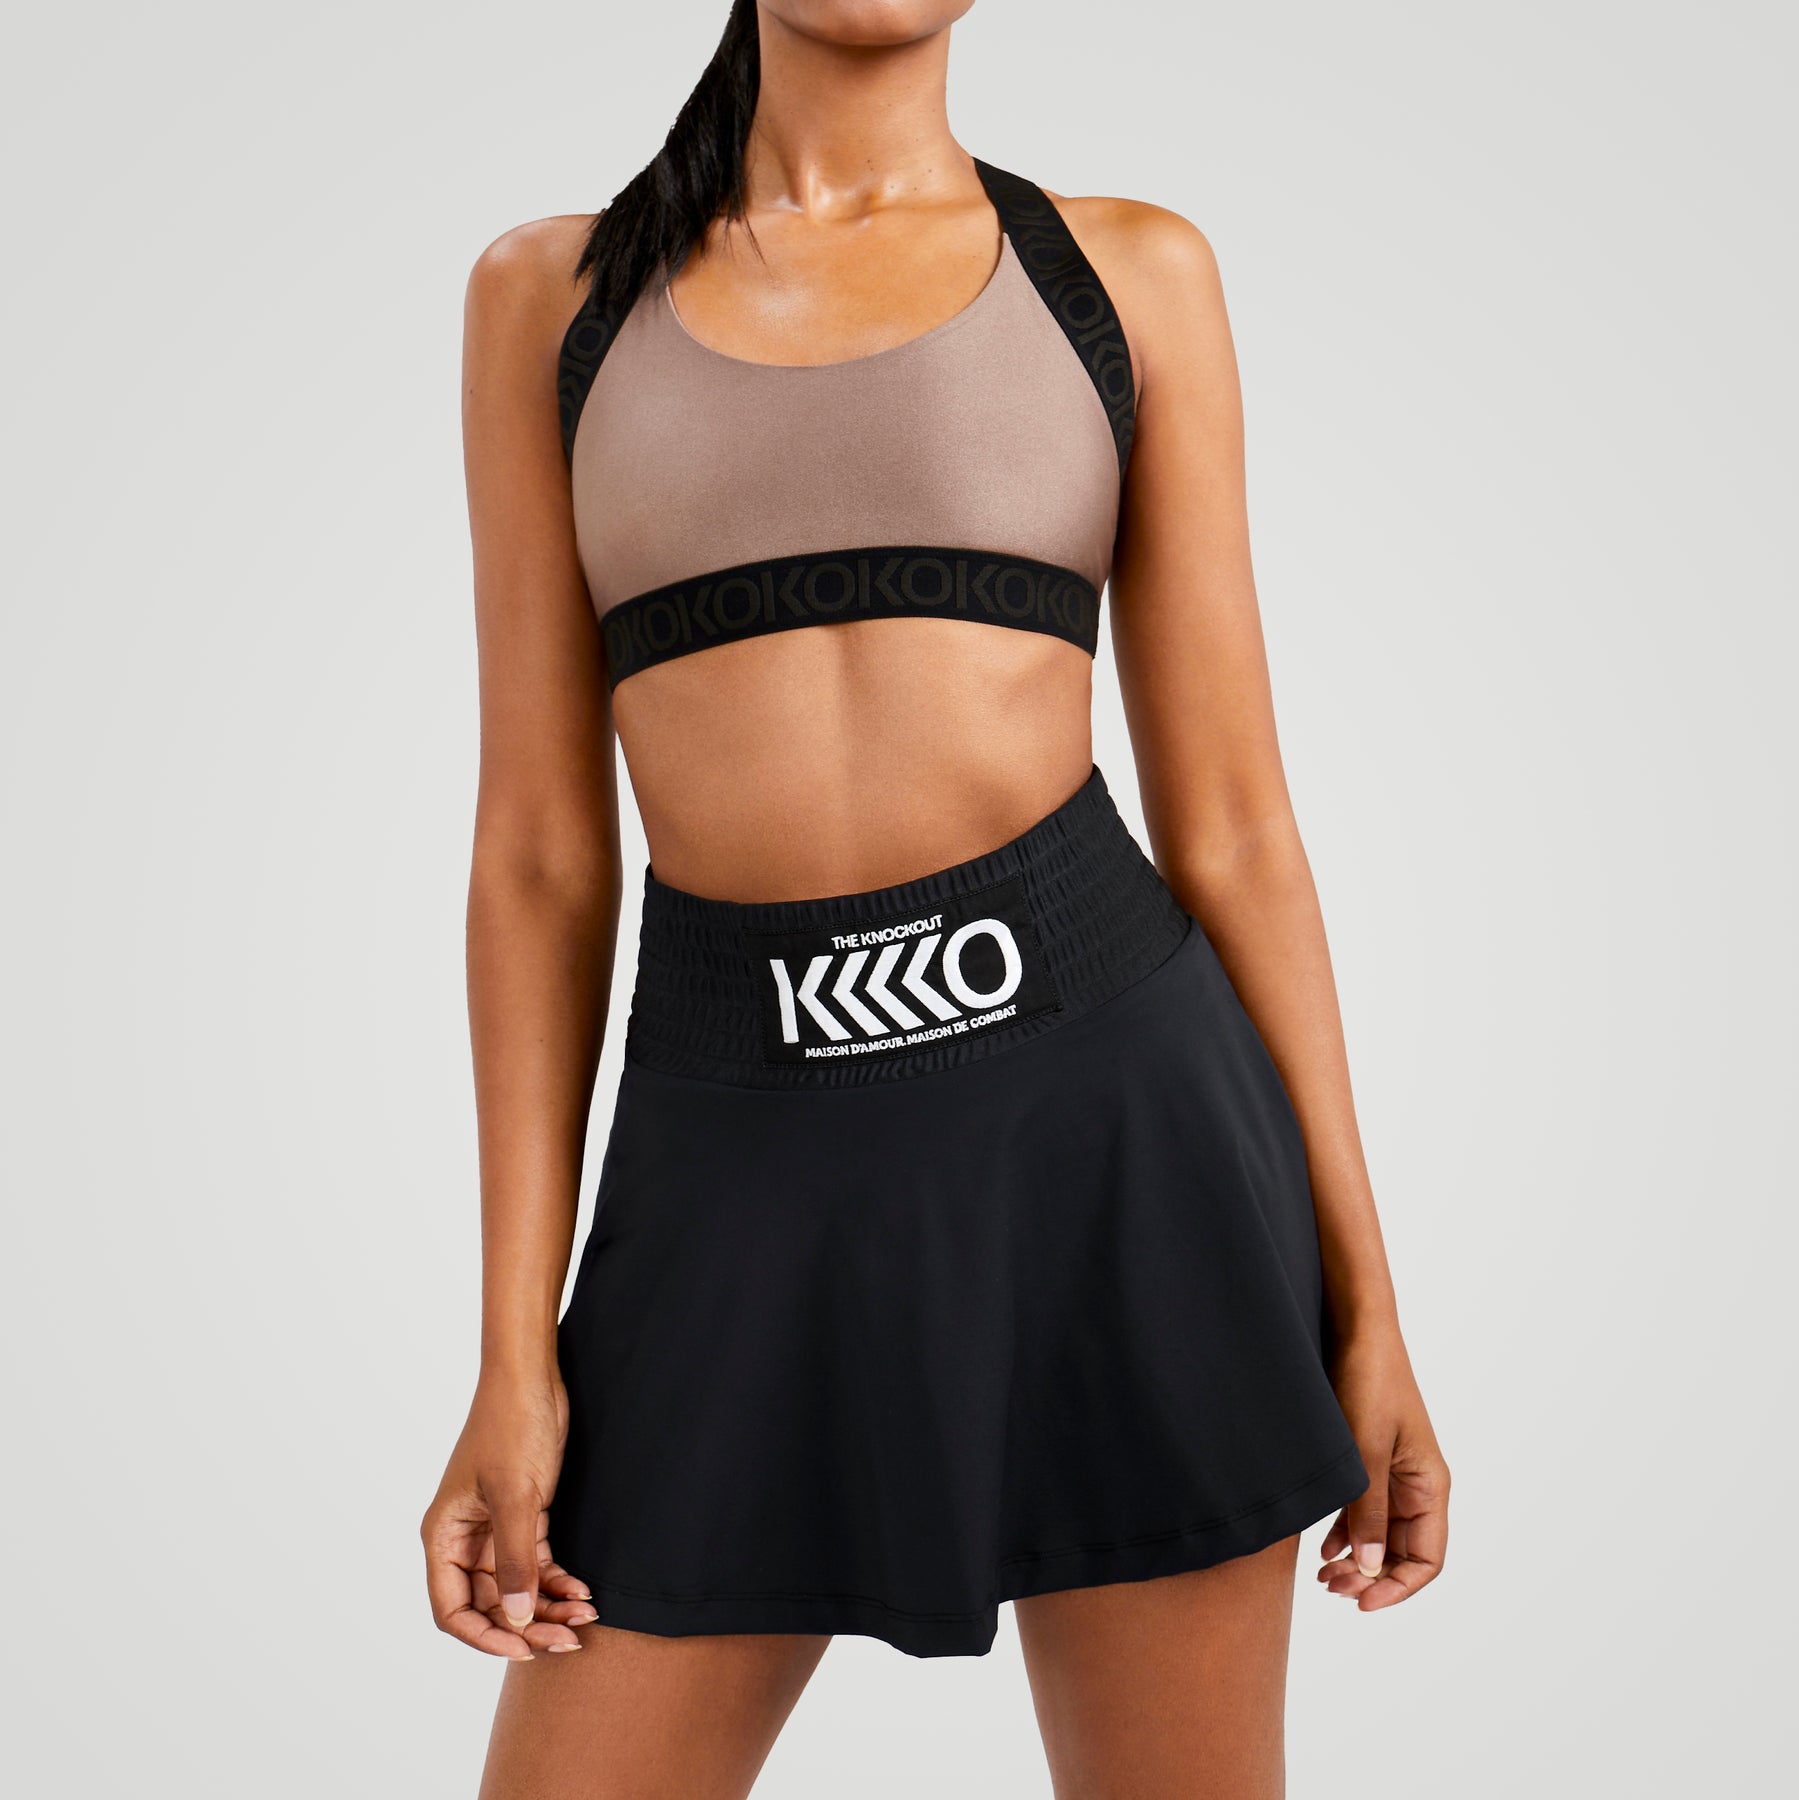 Fighting skirt outfit & sports bra – The Knockout Paris